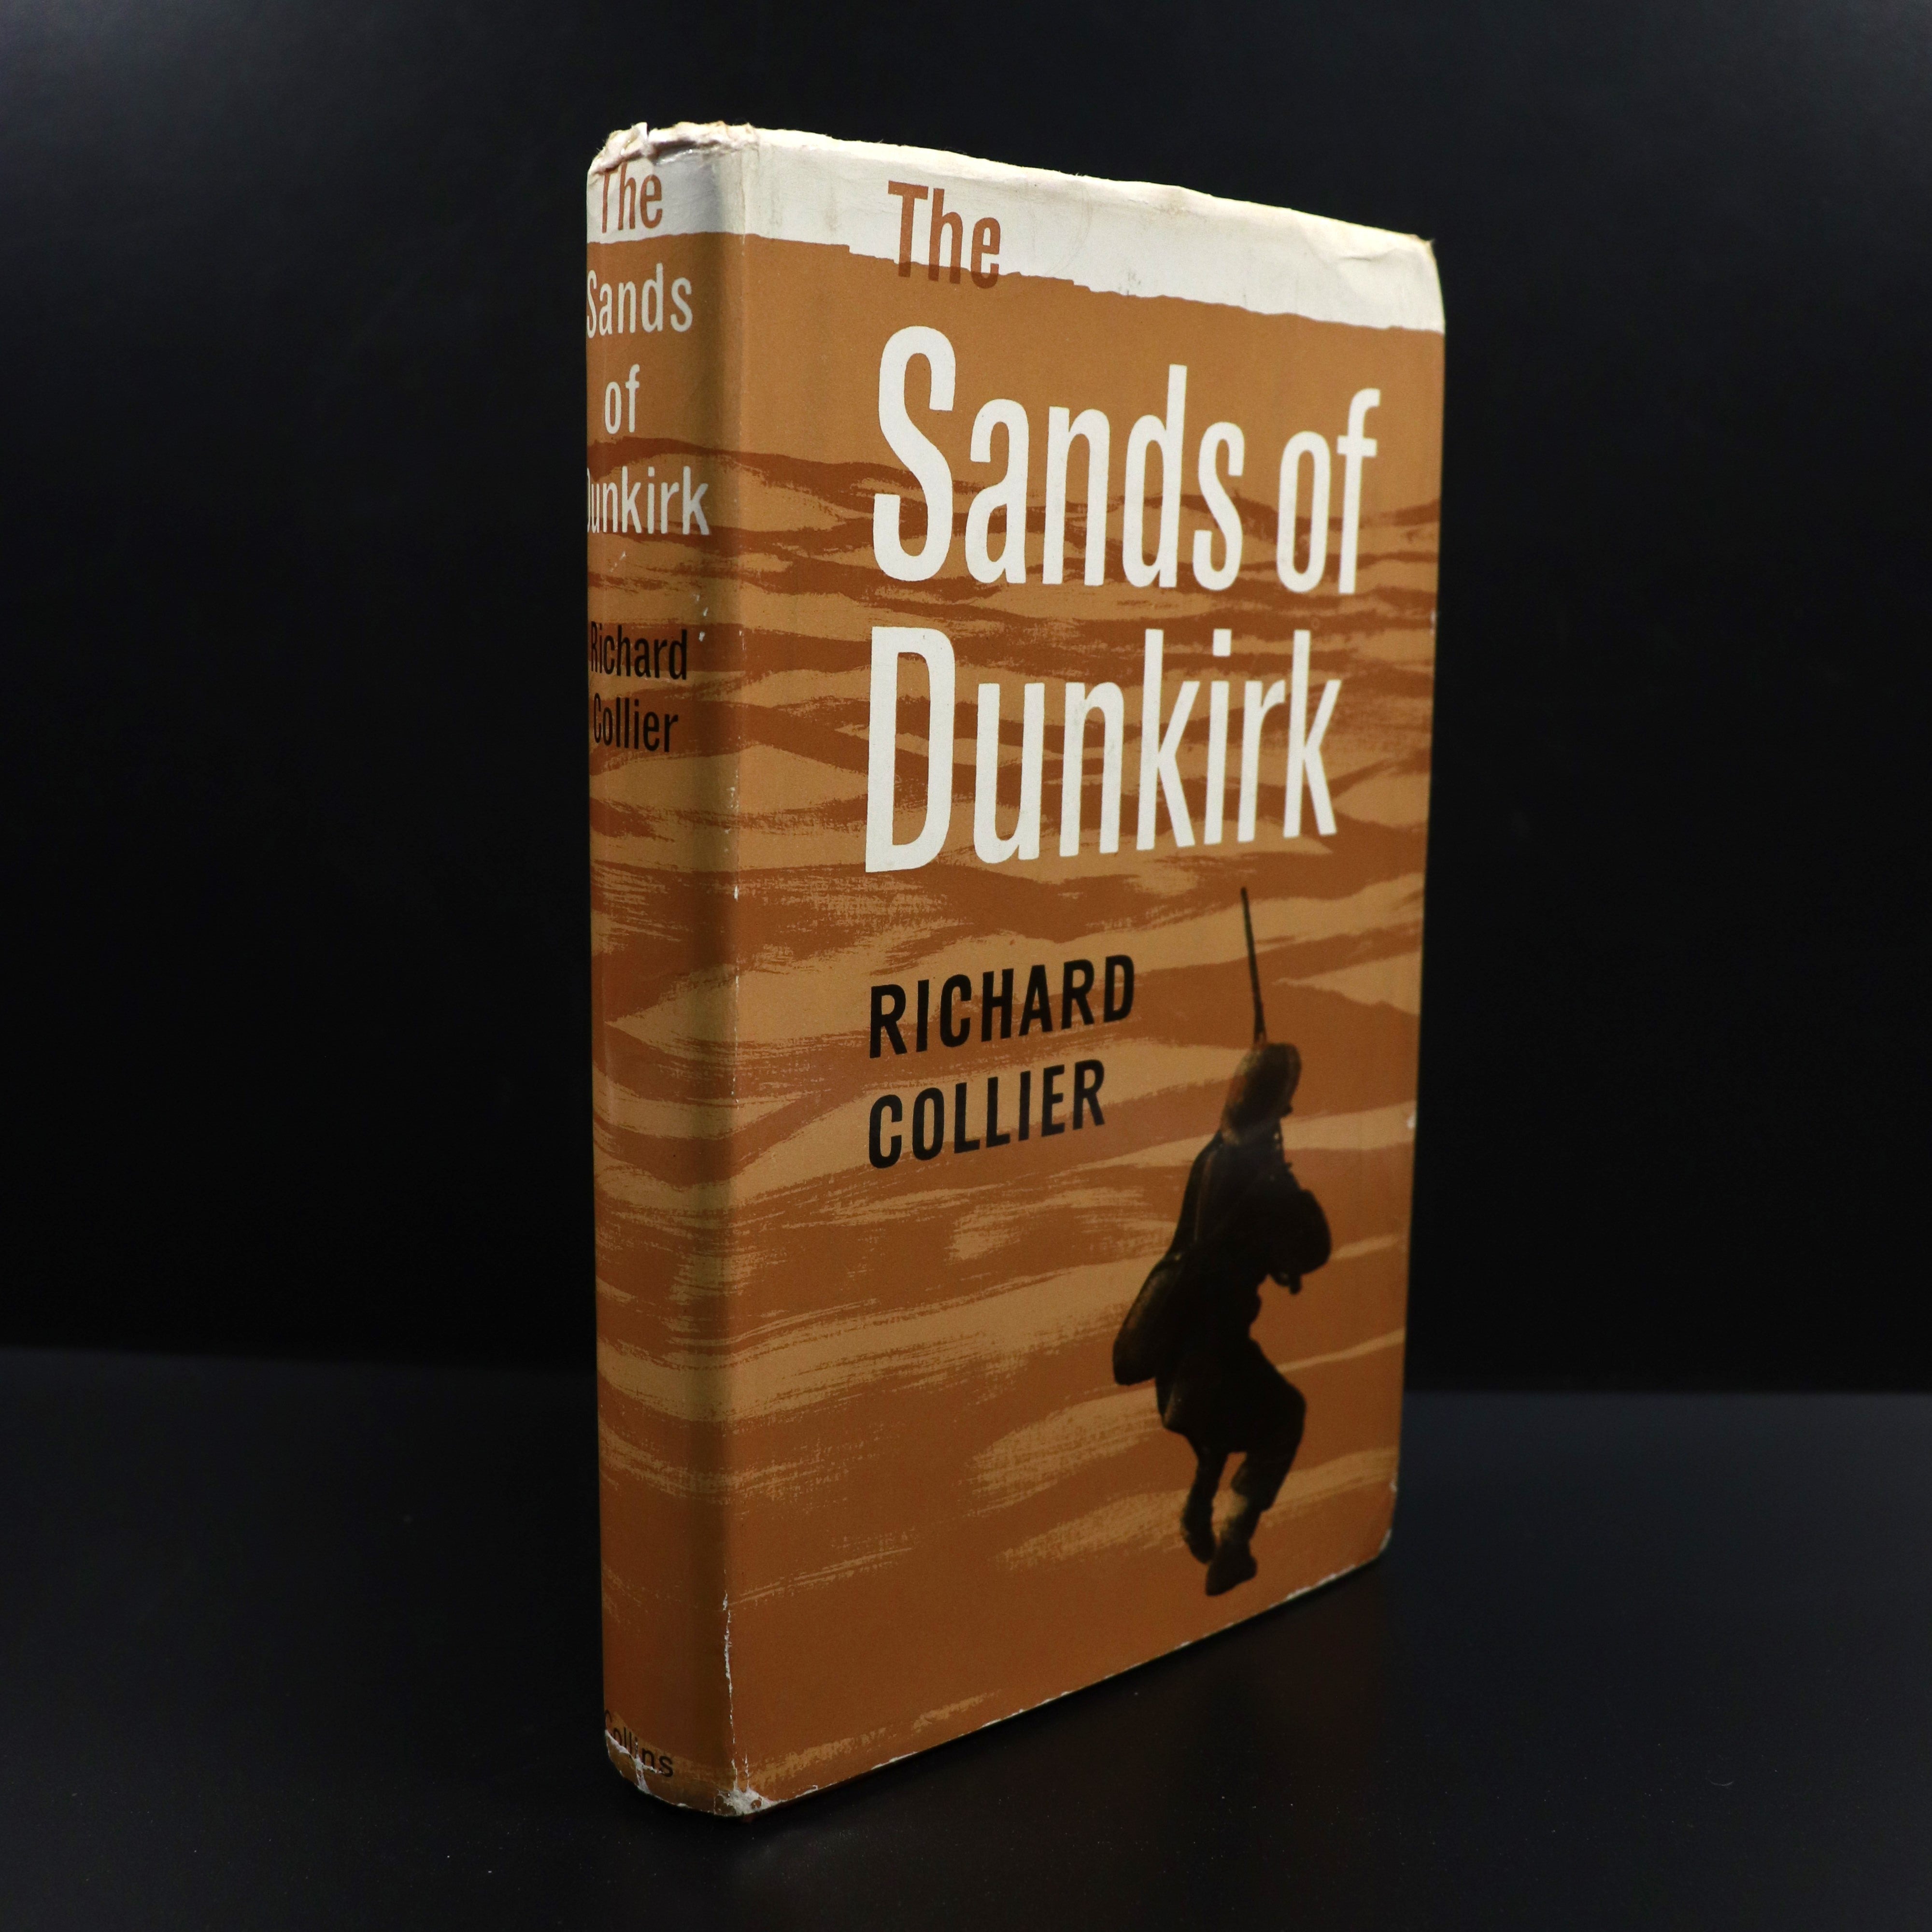 1961 The Sands Of Dunkirk by Richard Collier WW2 Military History Book